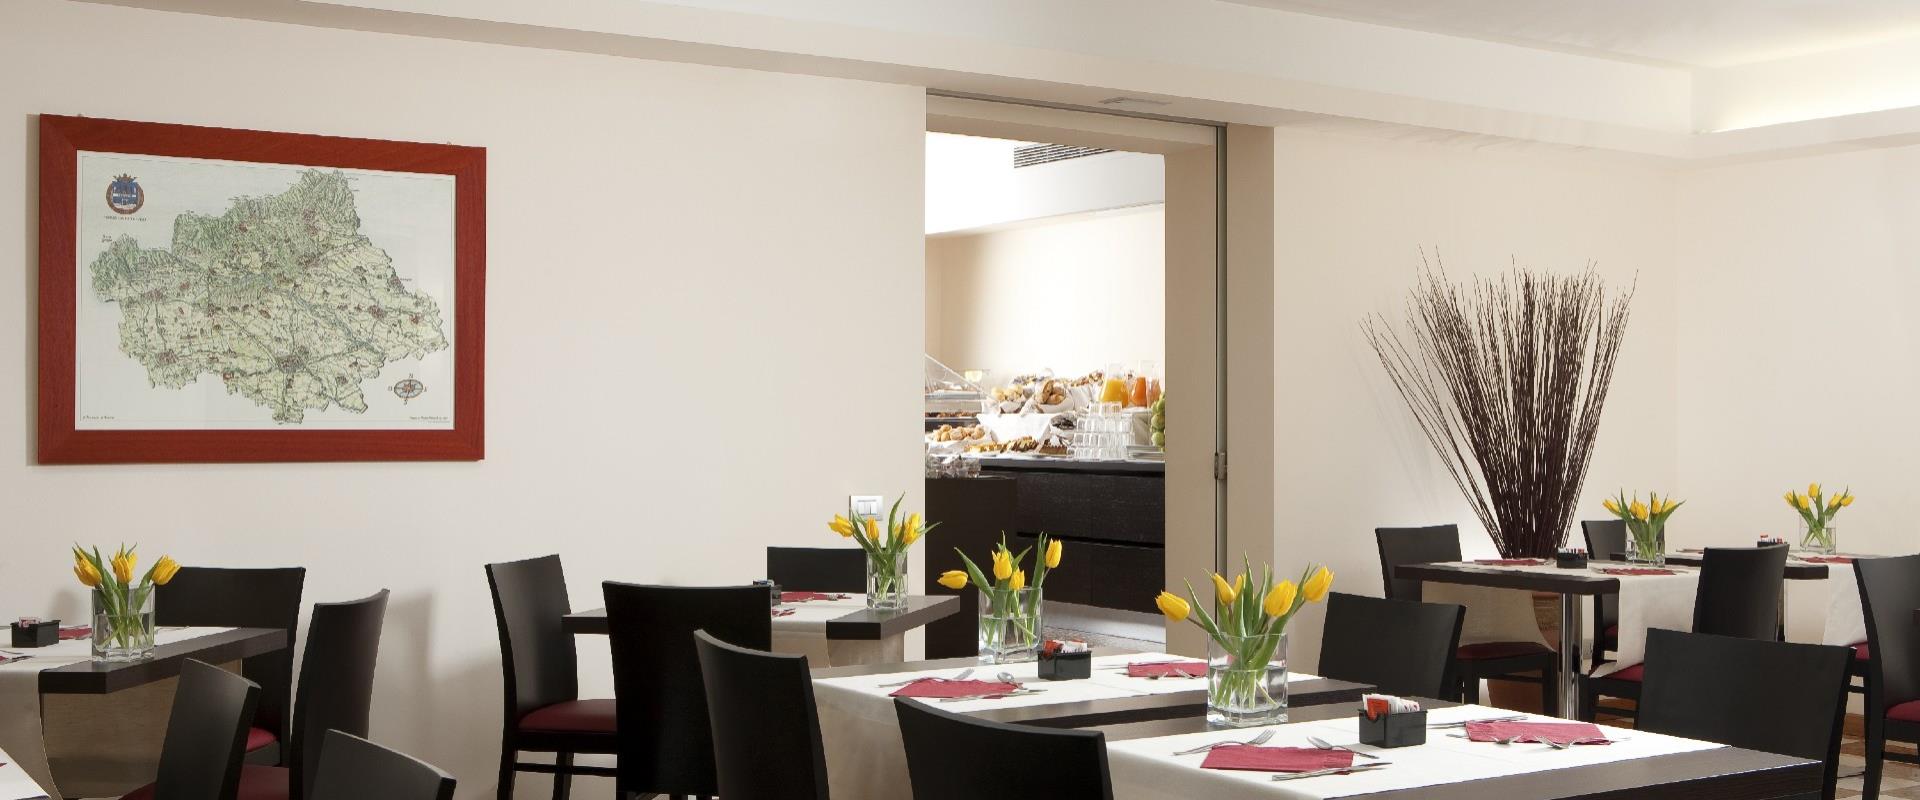 Are you looking for a hotel in Treviso-Silea with a rich breakfast in the morning? Choose Titian Inn Hotel Treviso, our comfortable 4-star hotel.